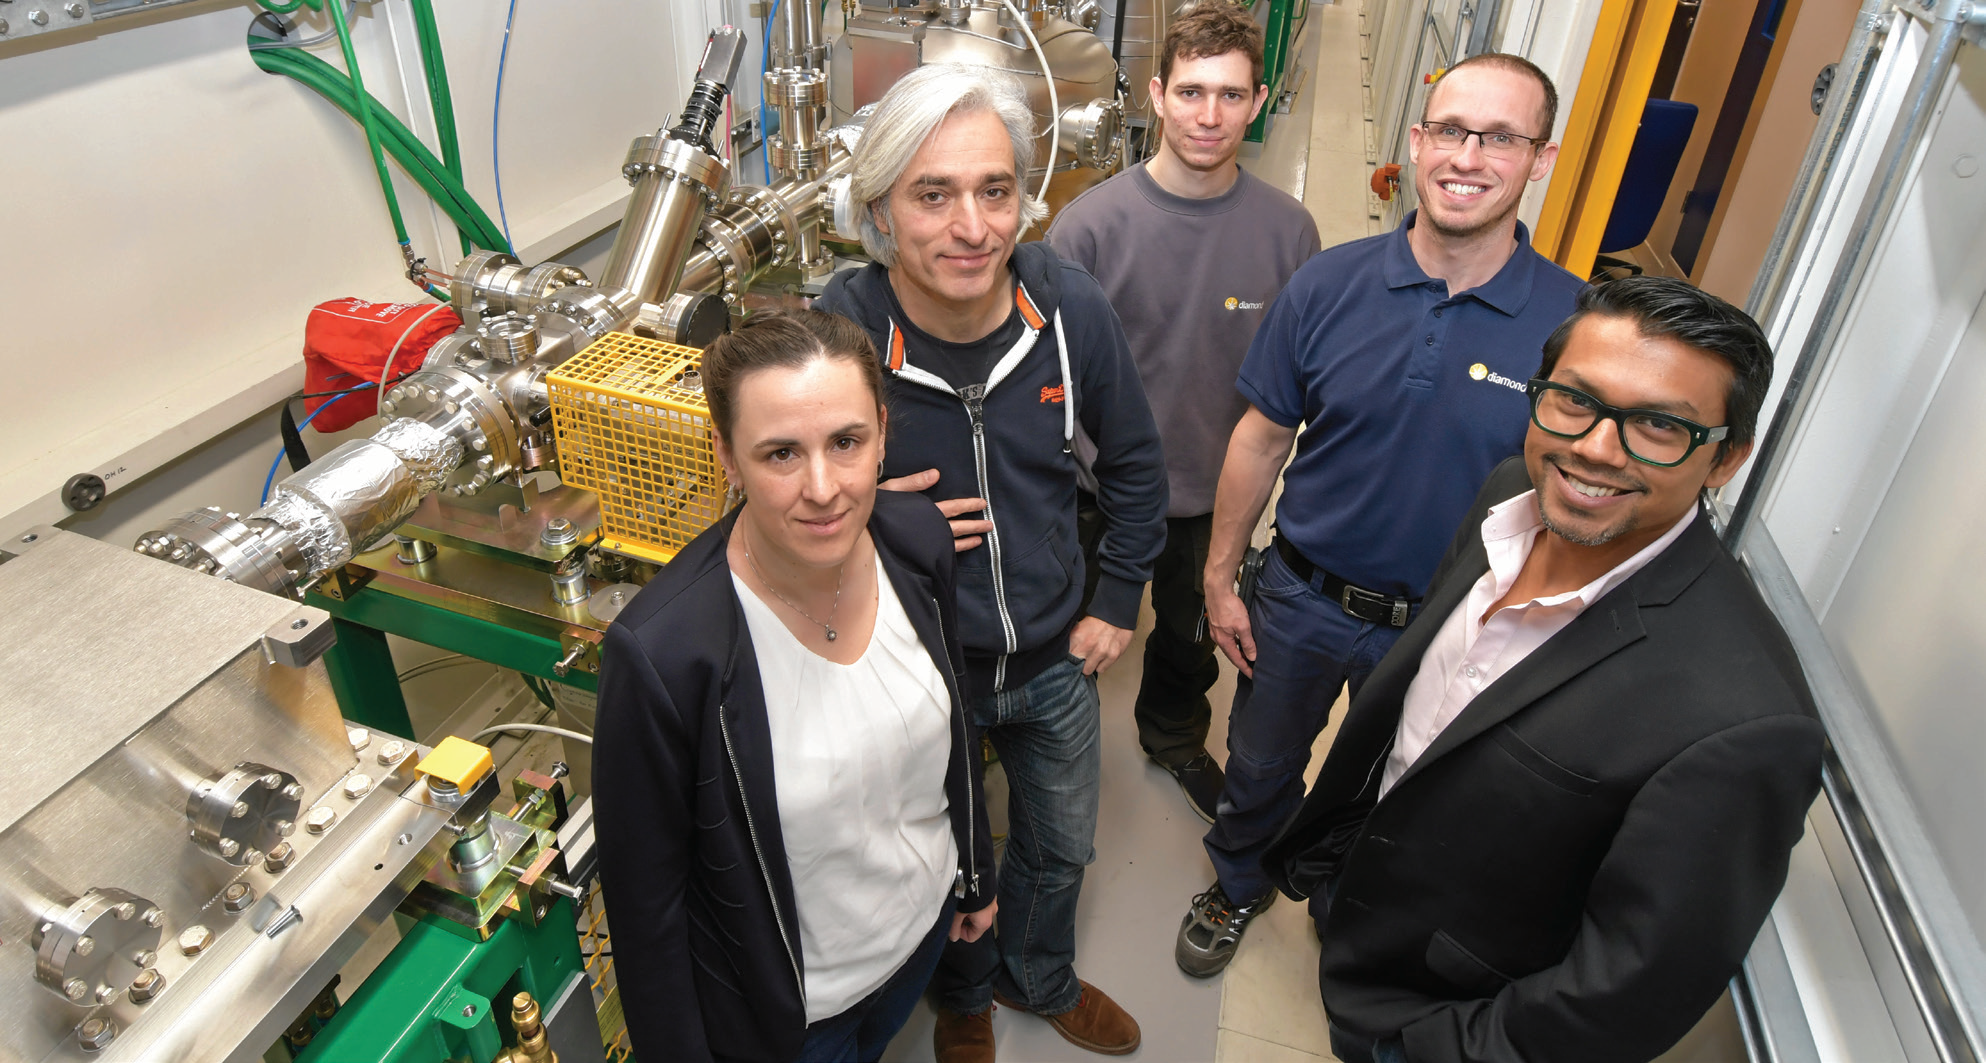 DIAD beamline team, early 2019, left to right: Christina Reinhard, Michael Drakopoulos, Tom Yates, Pete Garland, Sharif Ahmed.